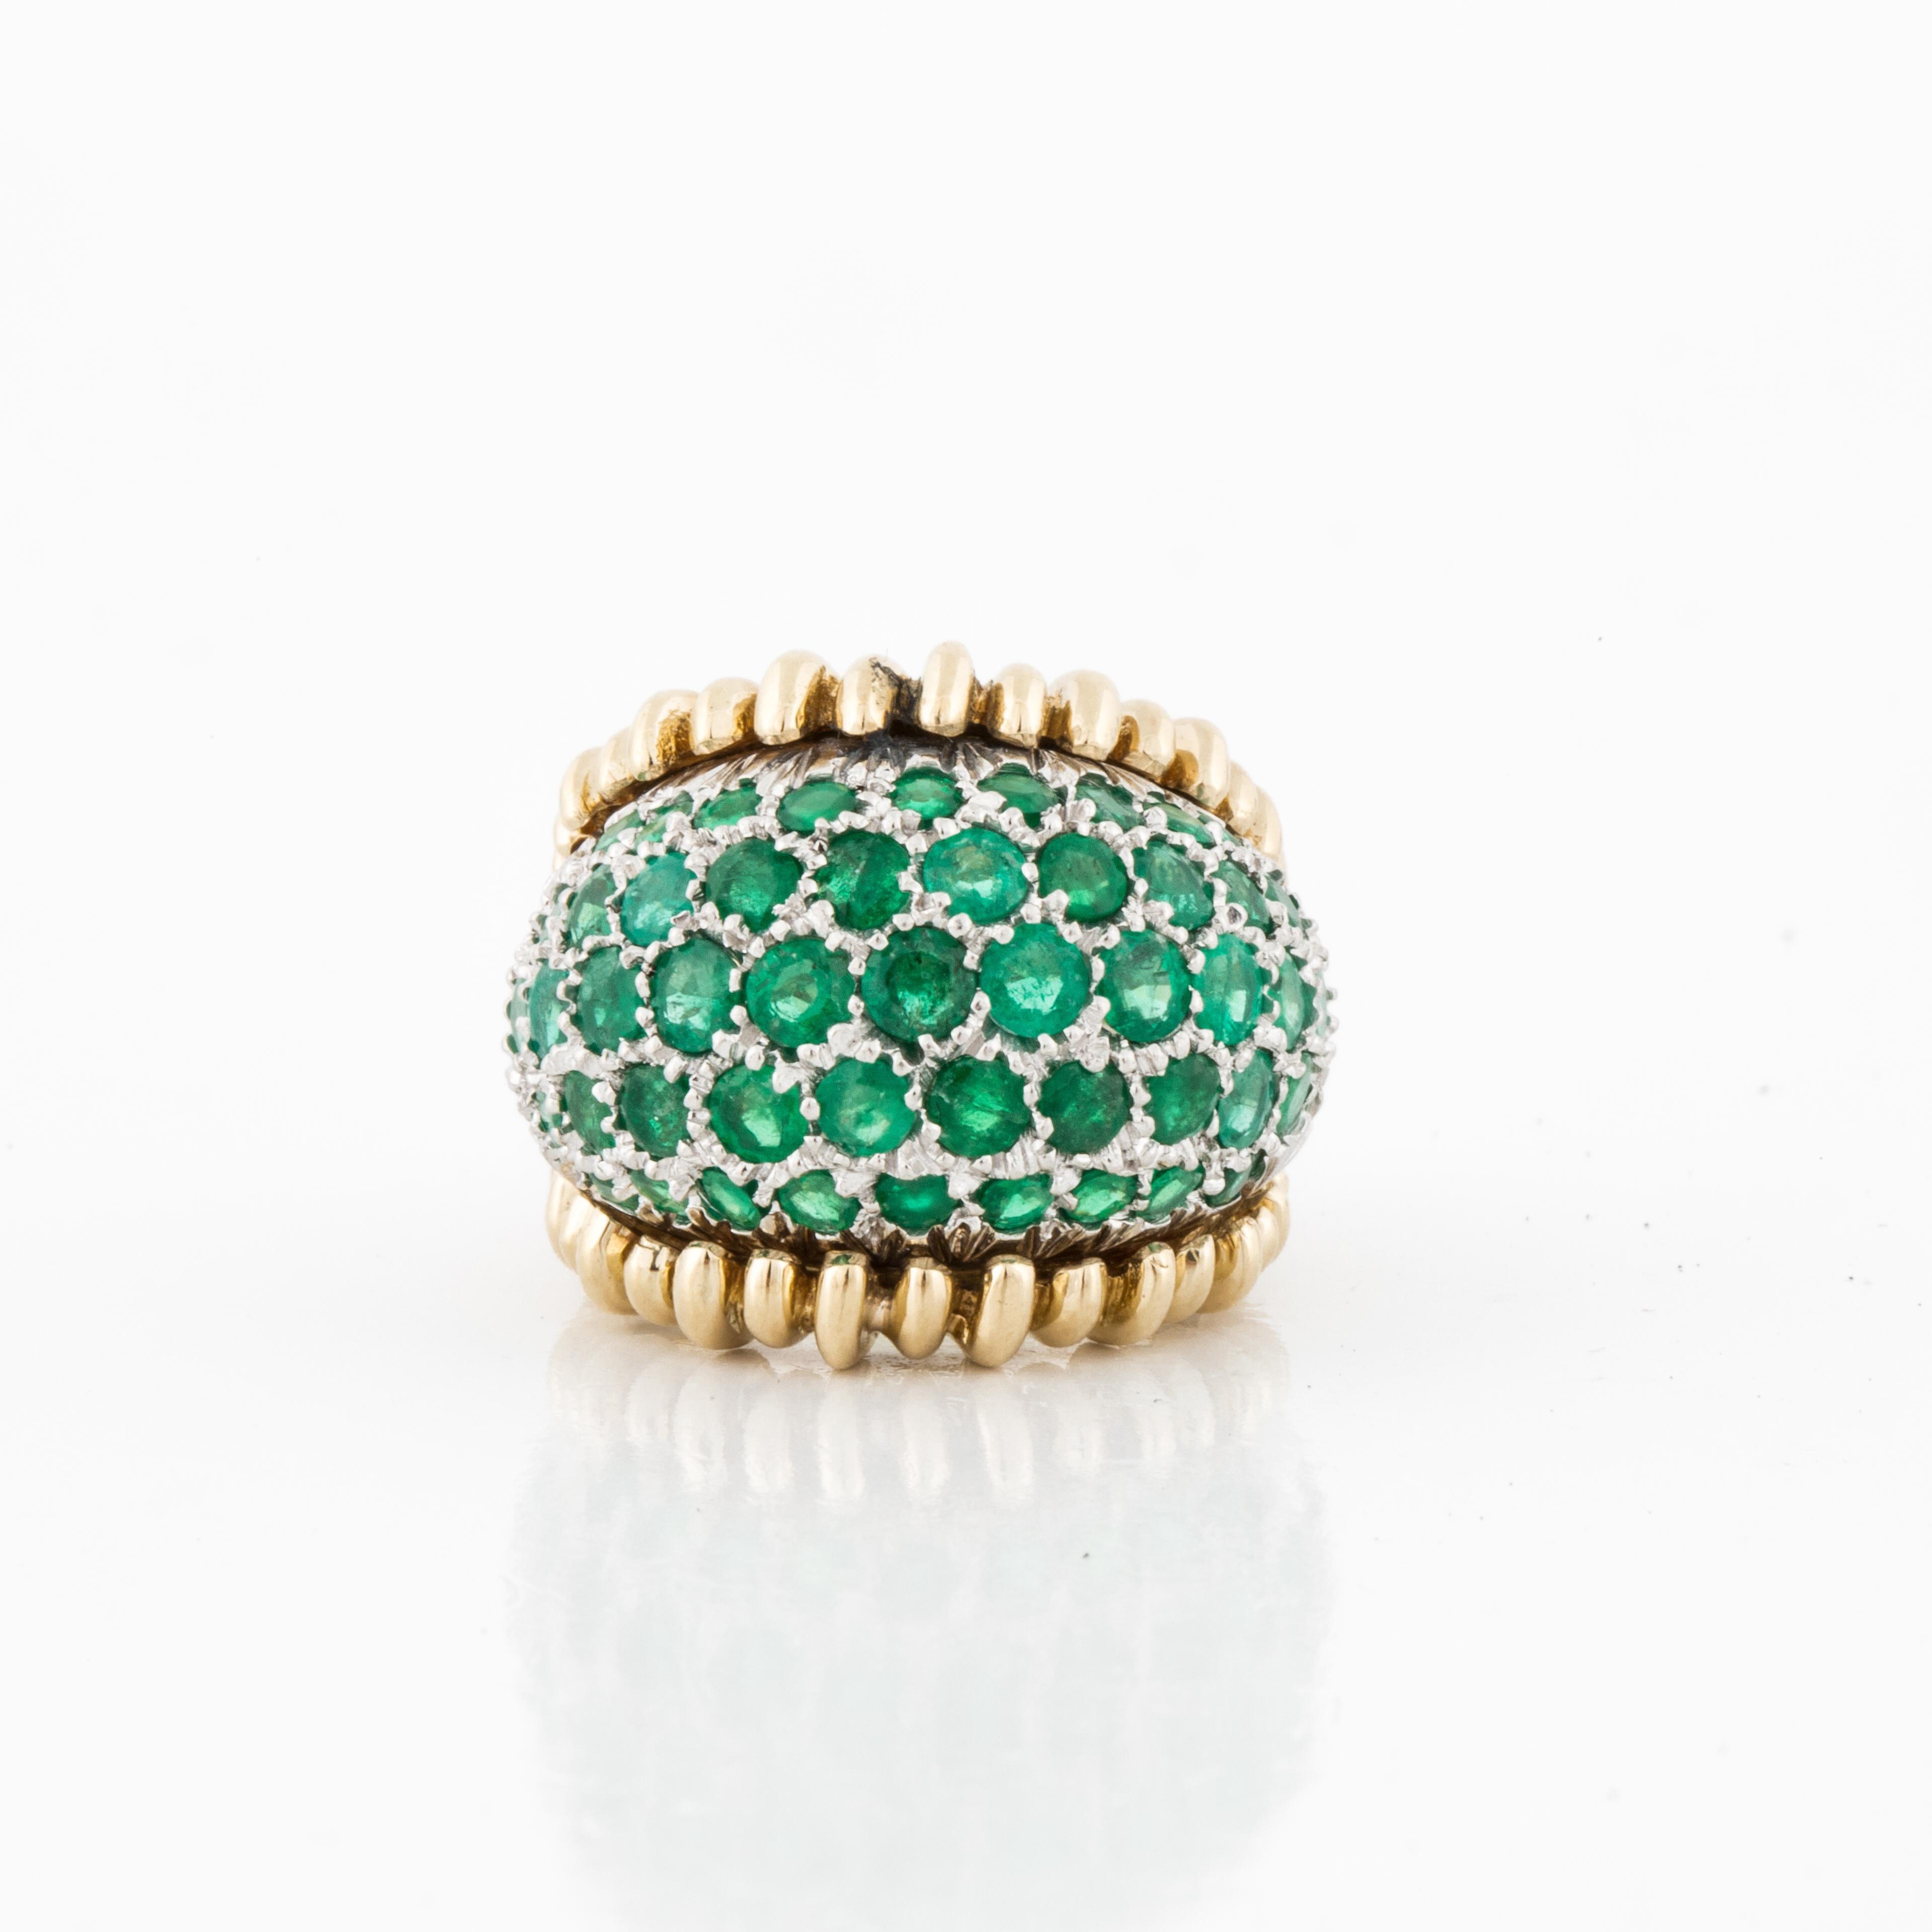 Platinum and 18K yellow gold ring in a bombé dome style with pavé set round emeralds.  There are 55 round emeralds that total 2.25 carats.  The ring is currently a size 4 1/4.  It measures 7/8 of an inch by 3/4 of an inch and stands 3/8 of an inch